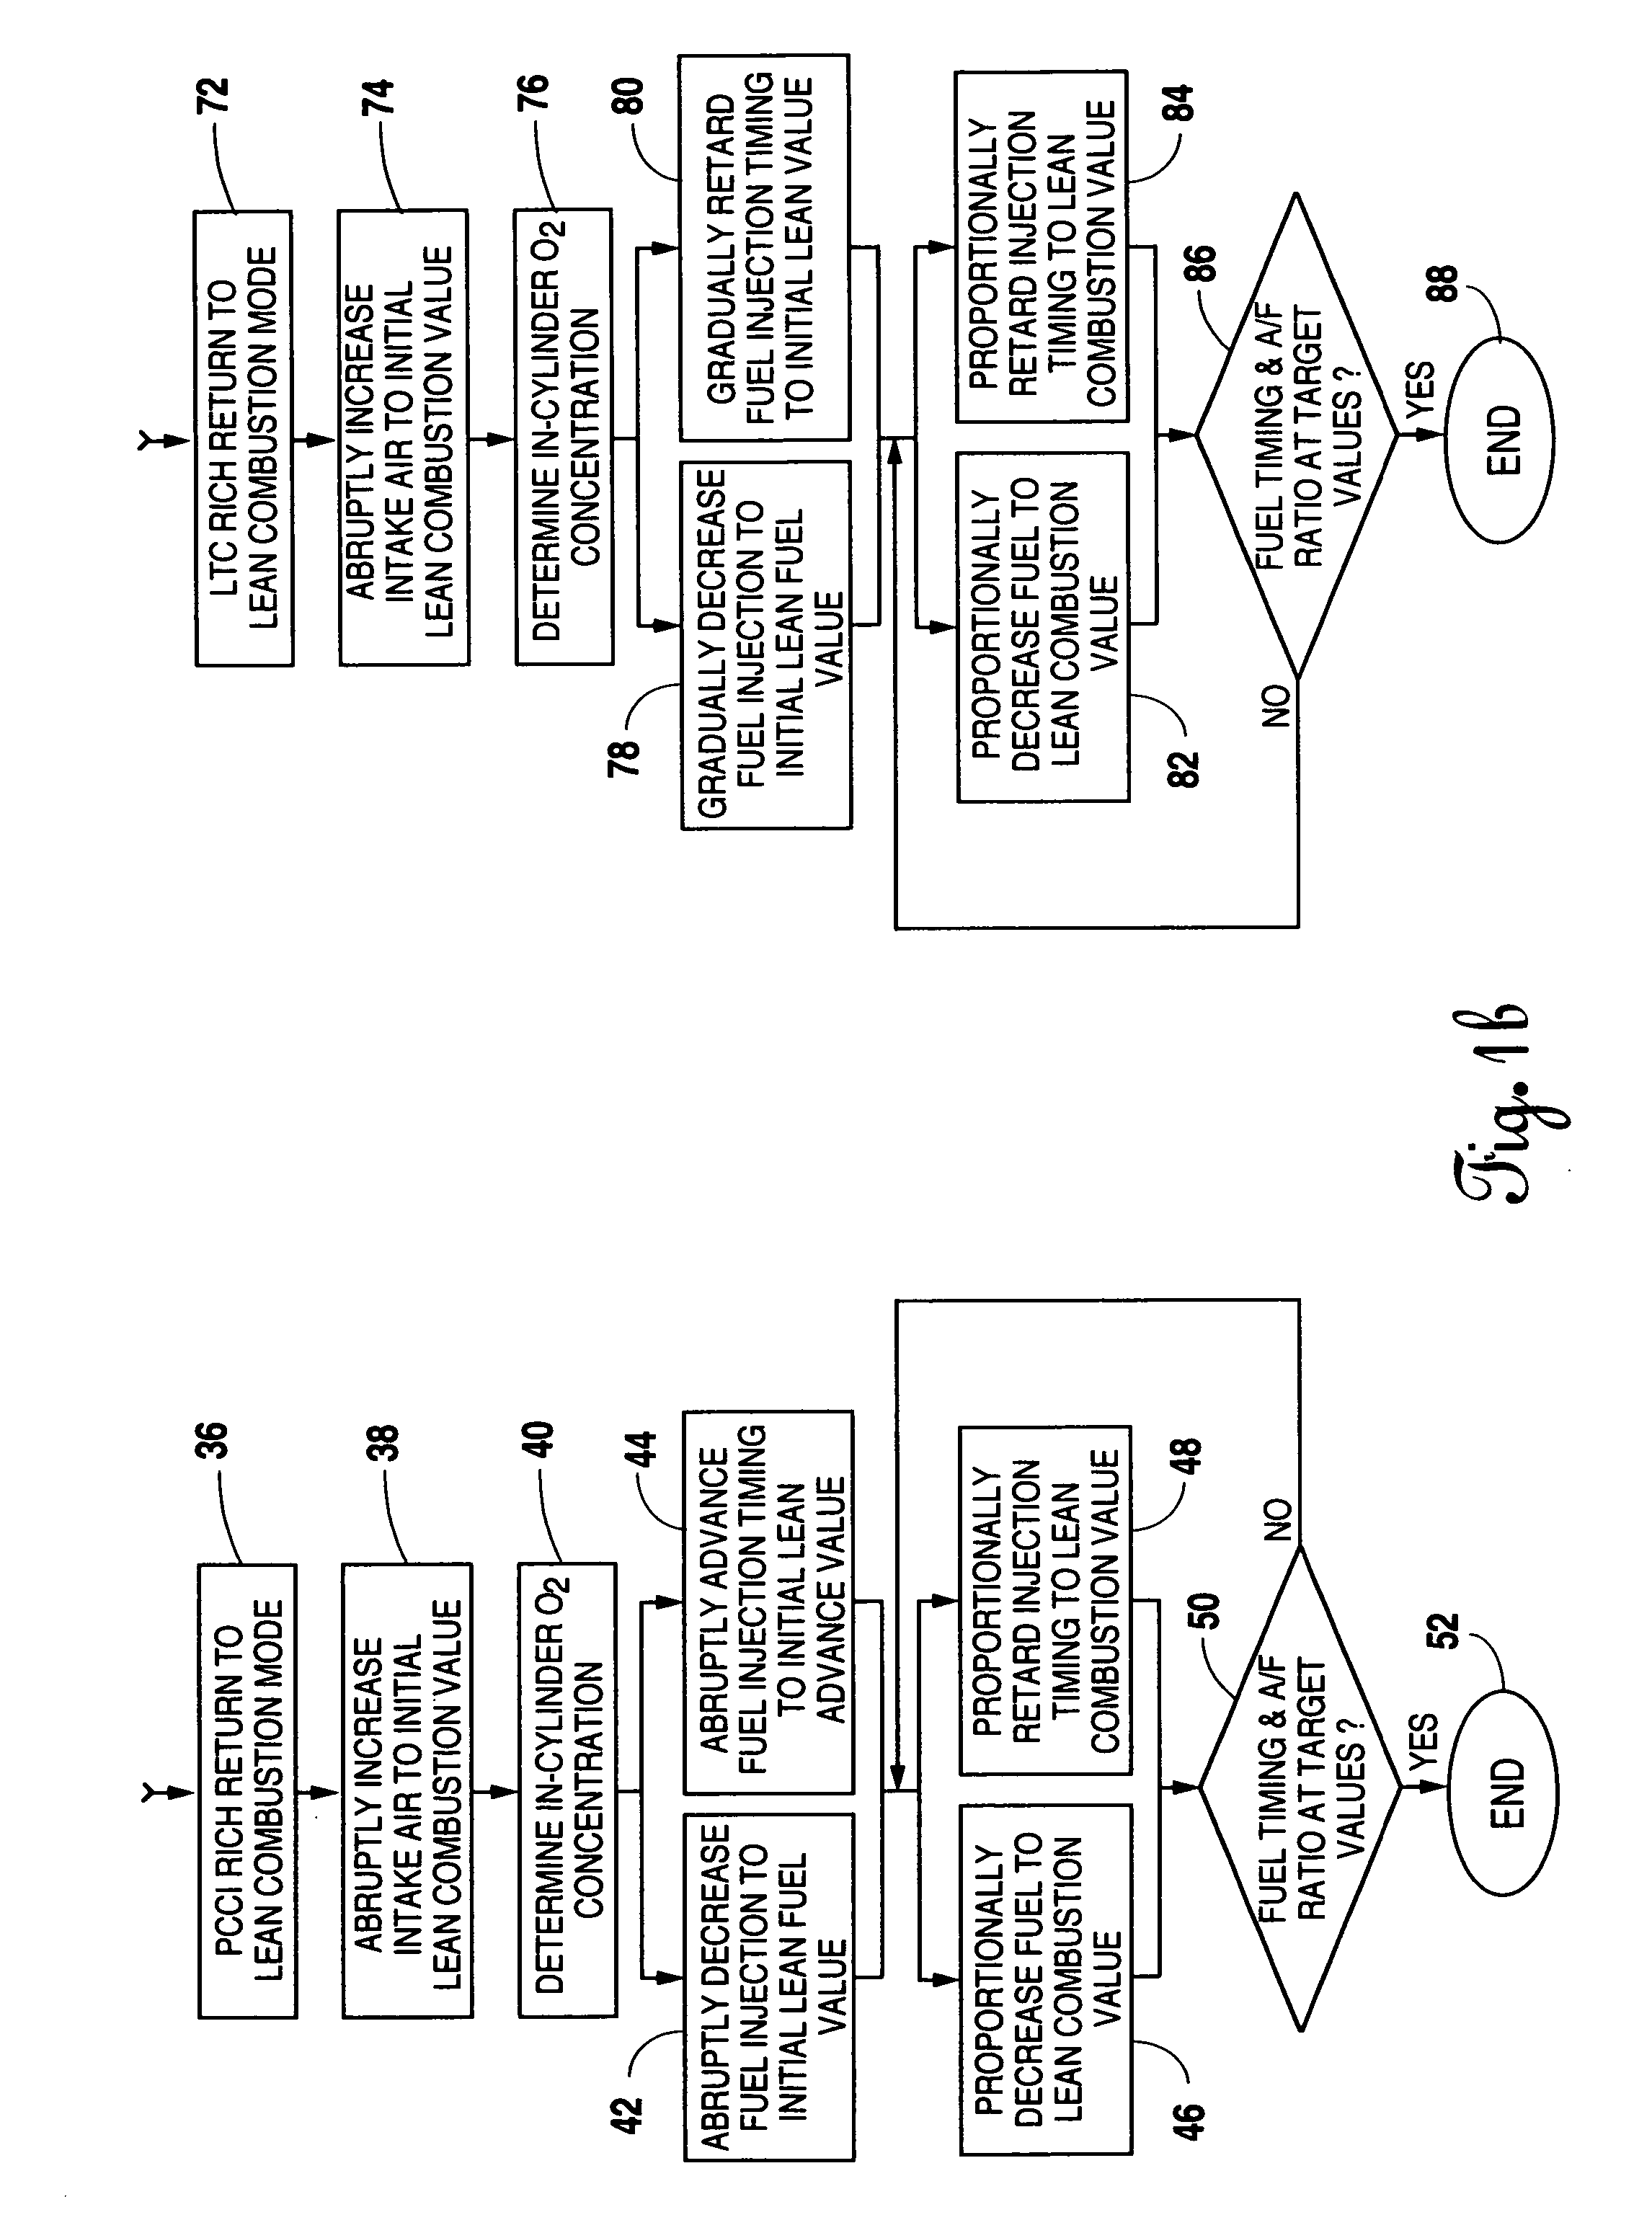 Method for rapid, stable torque transition between lean rich combustion modes